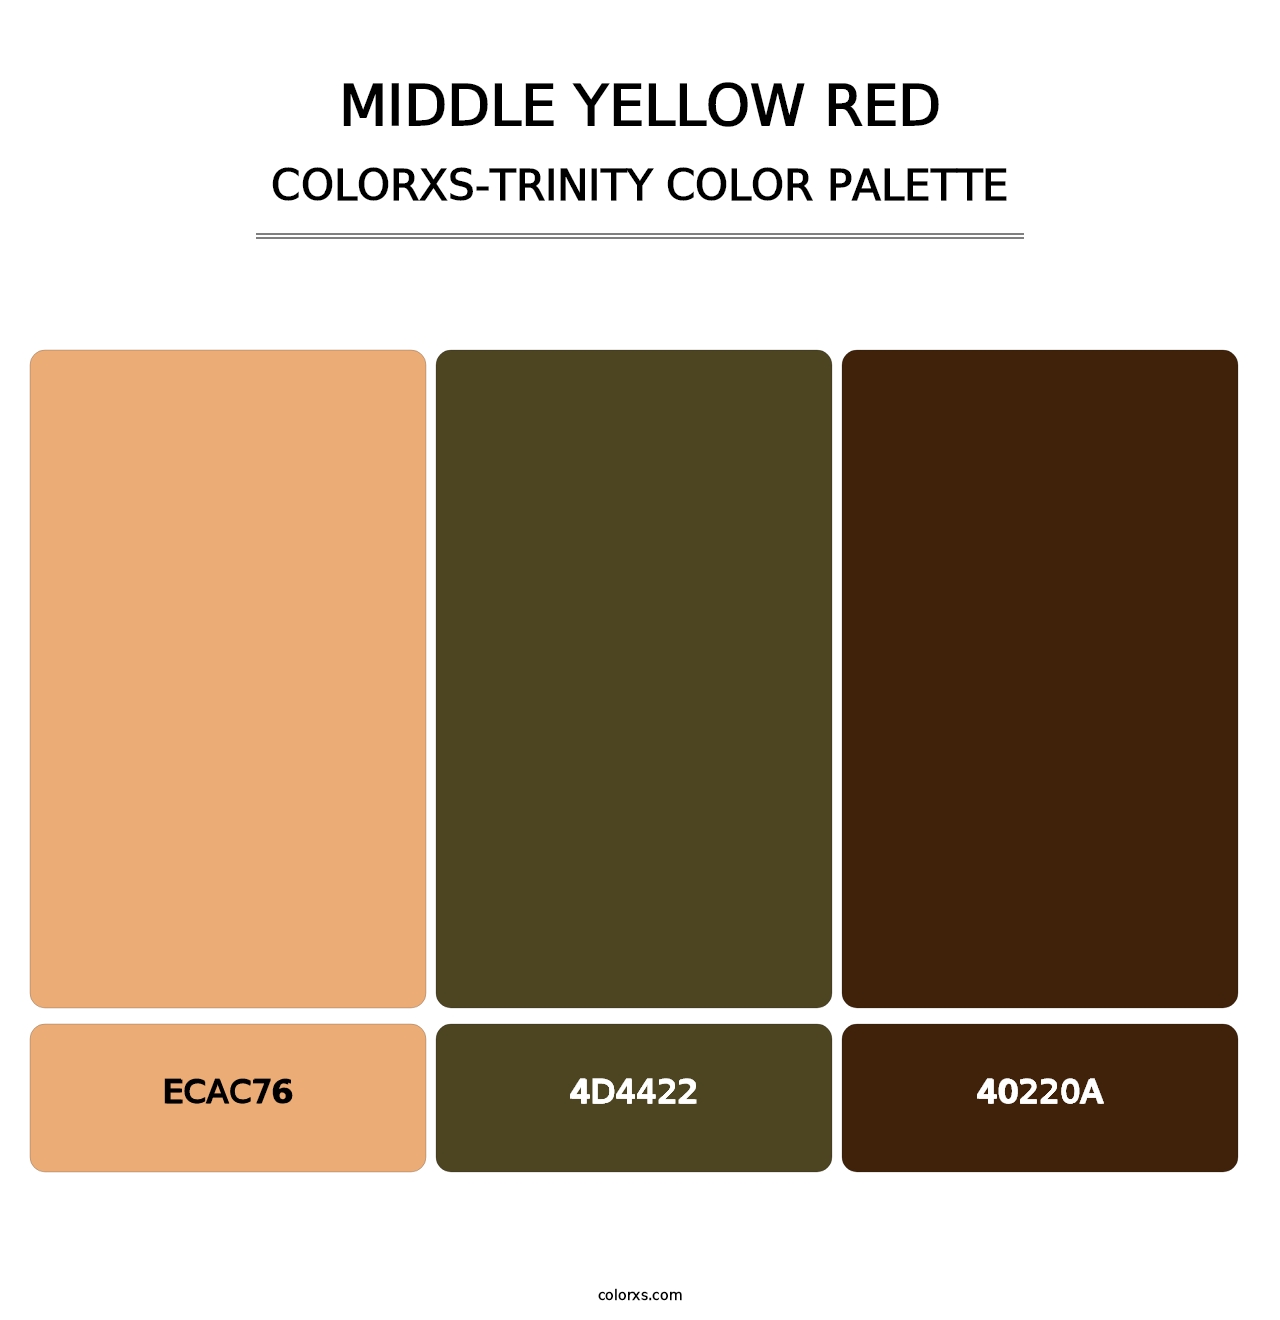 Middle Yellow Red - Colorxs Trinity Palette